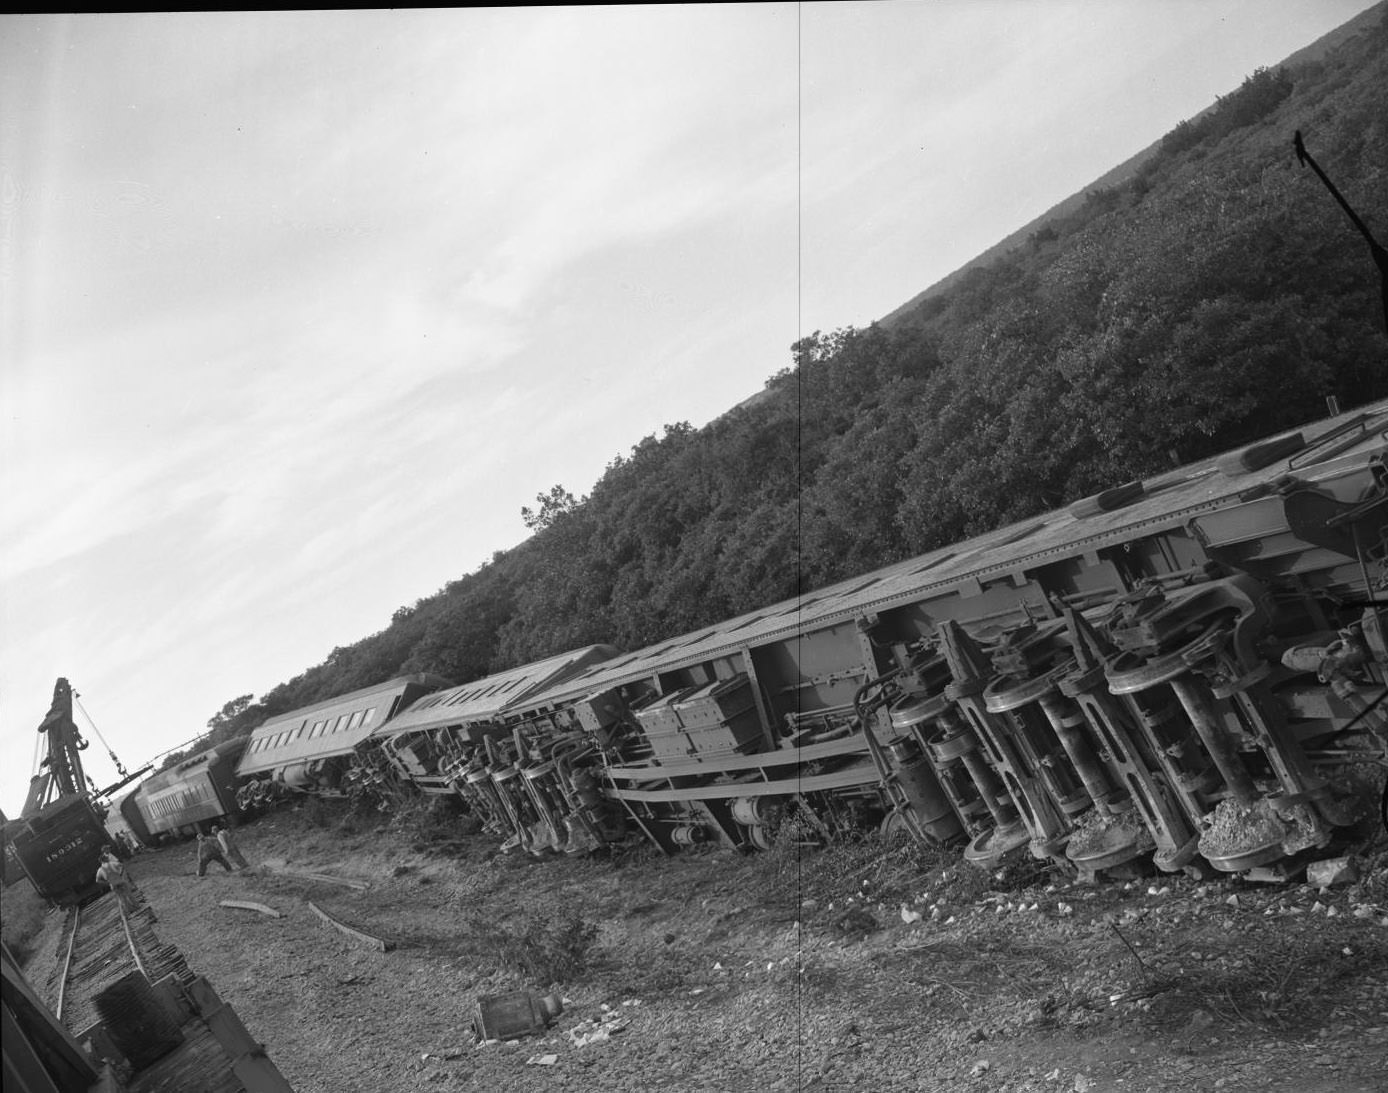 Train Wreck at Lampasas with Crane in Background, 1950.